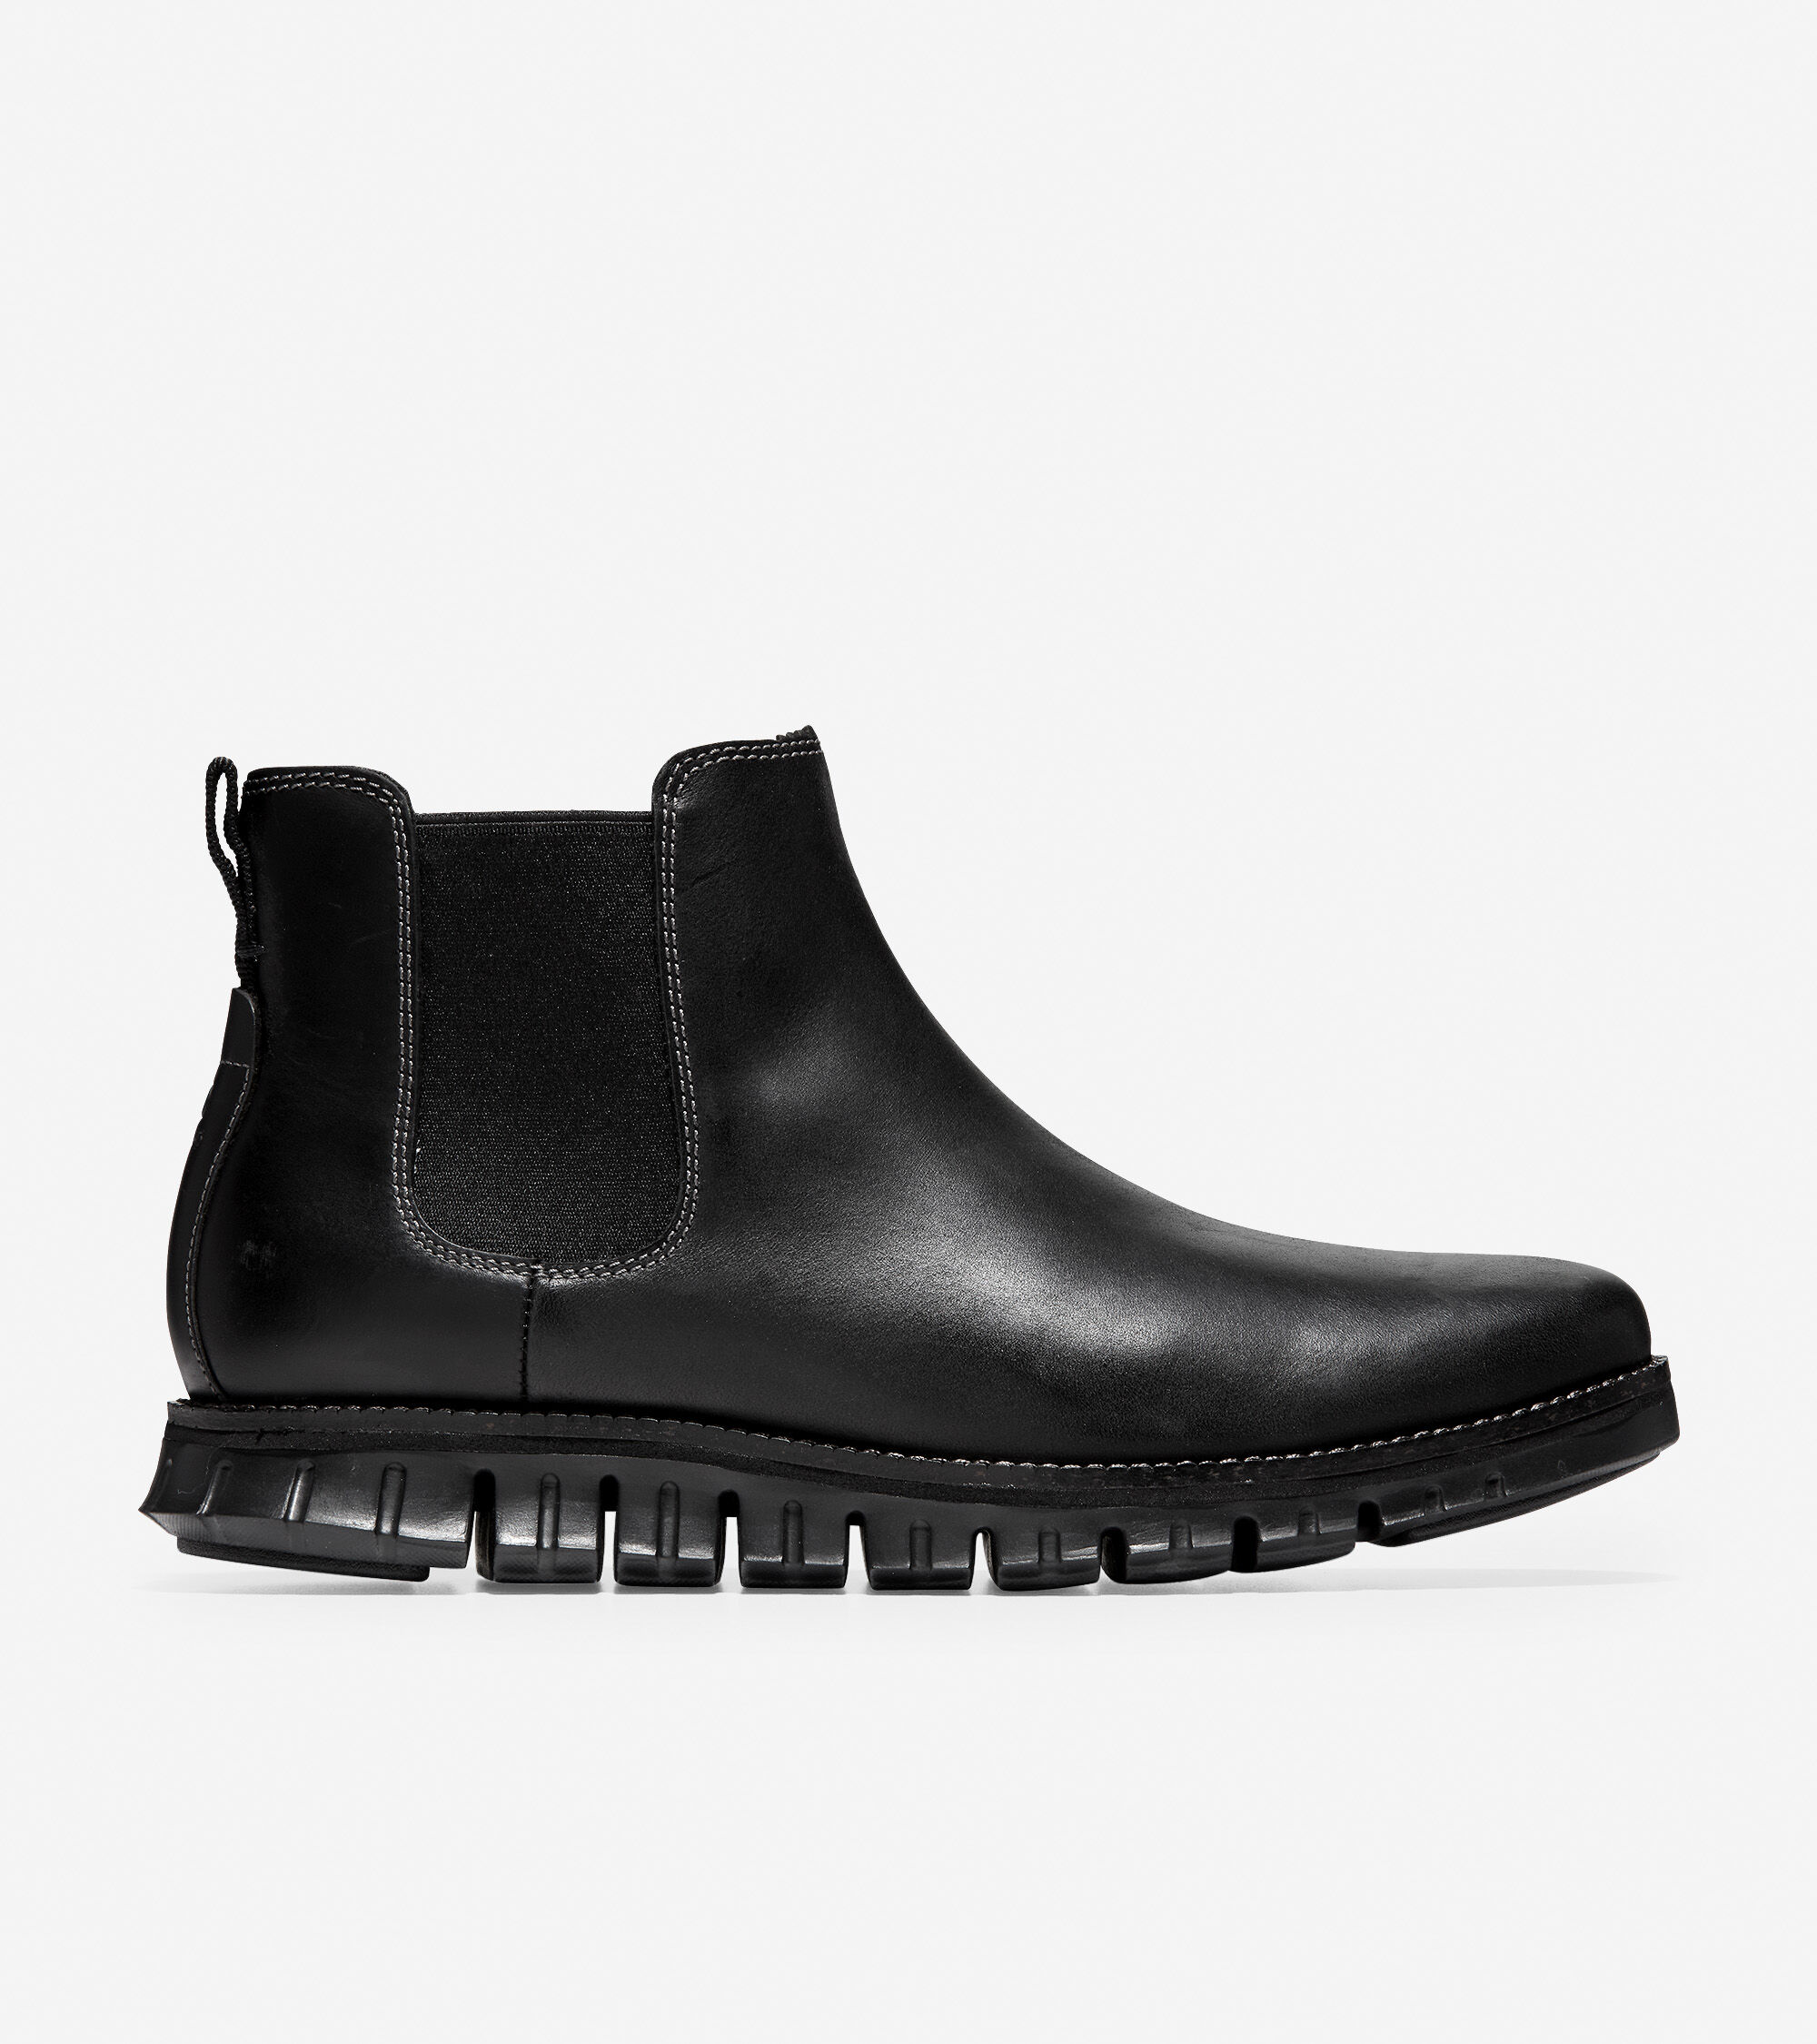 cole haan clearance mens